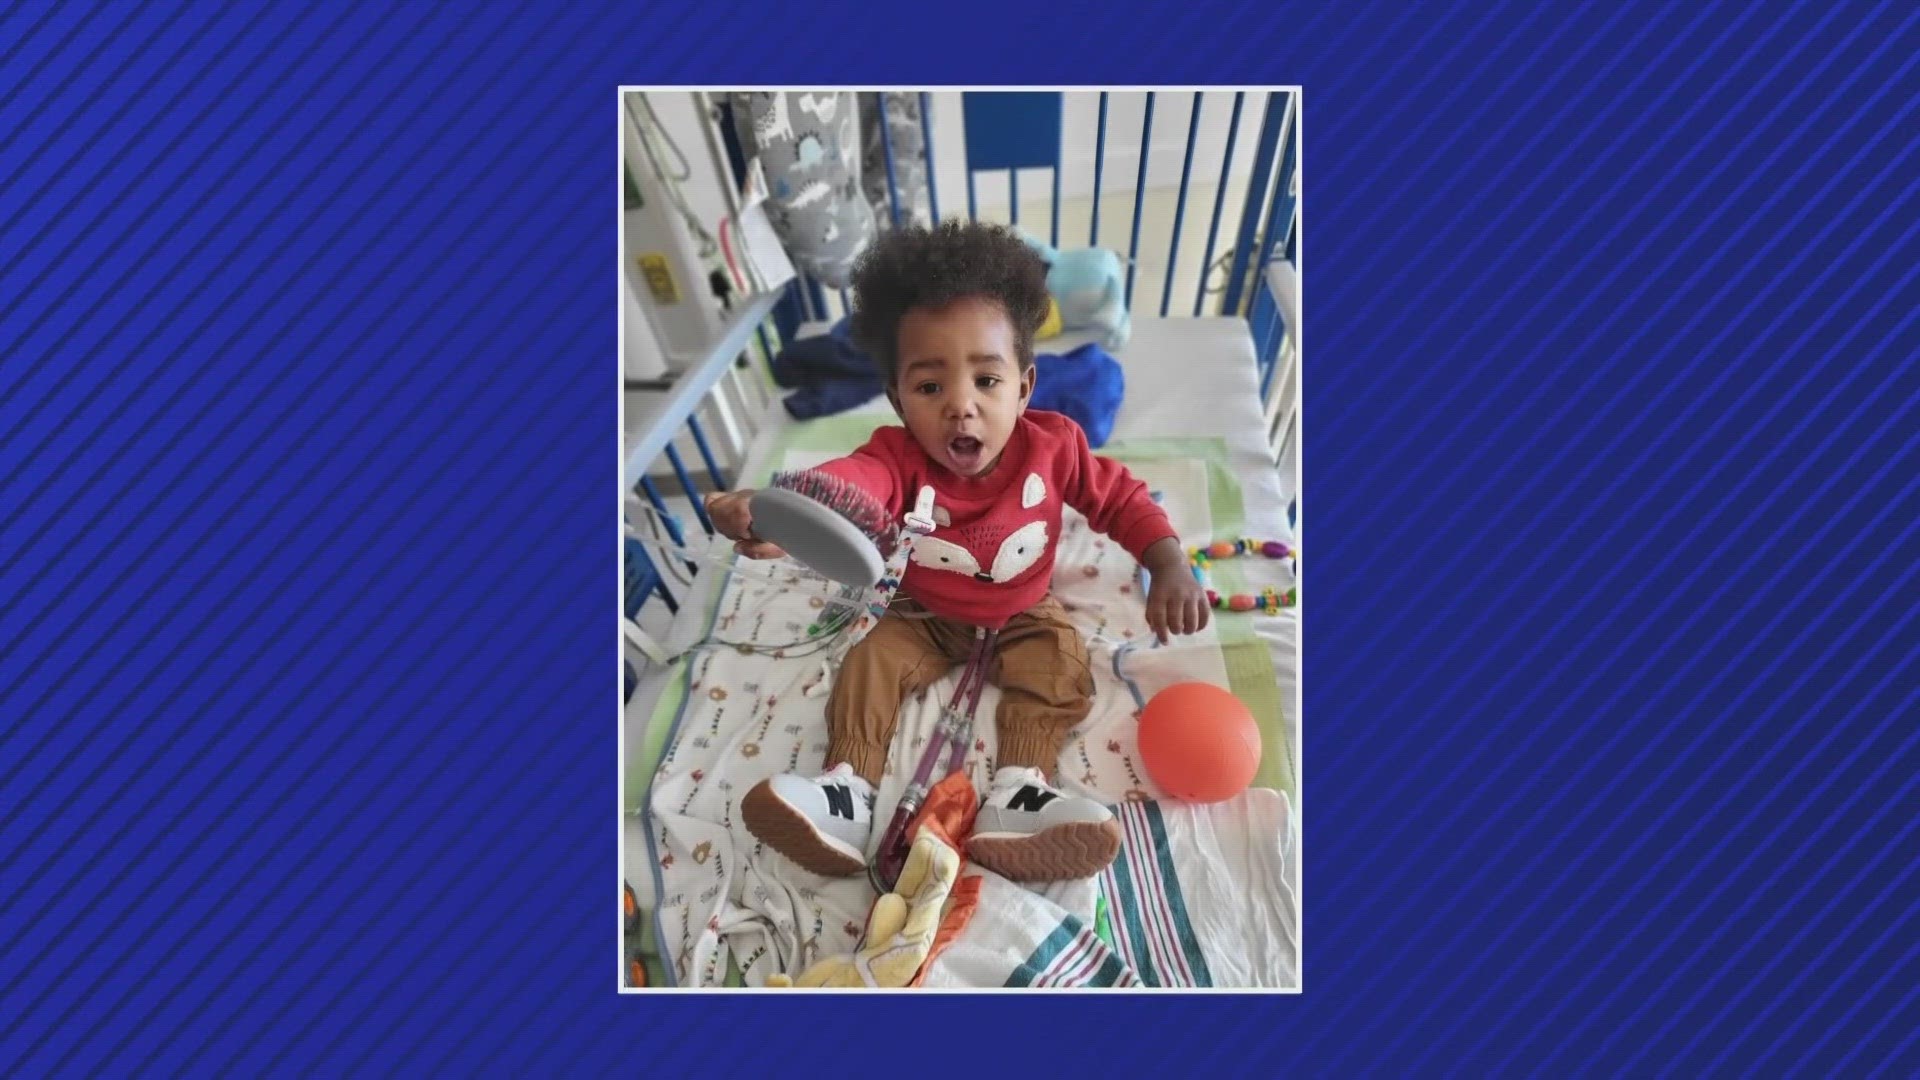 The Evans family moved from Cleveland to Columbus to get care for their son.